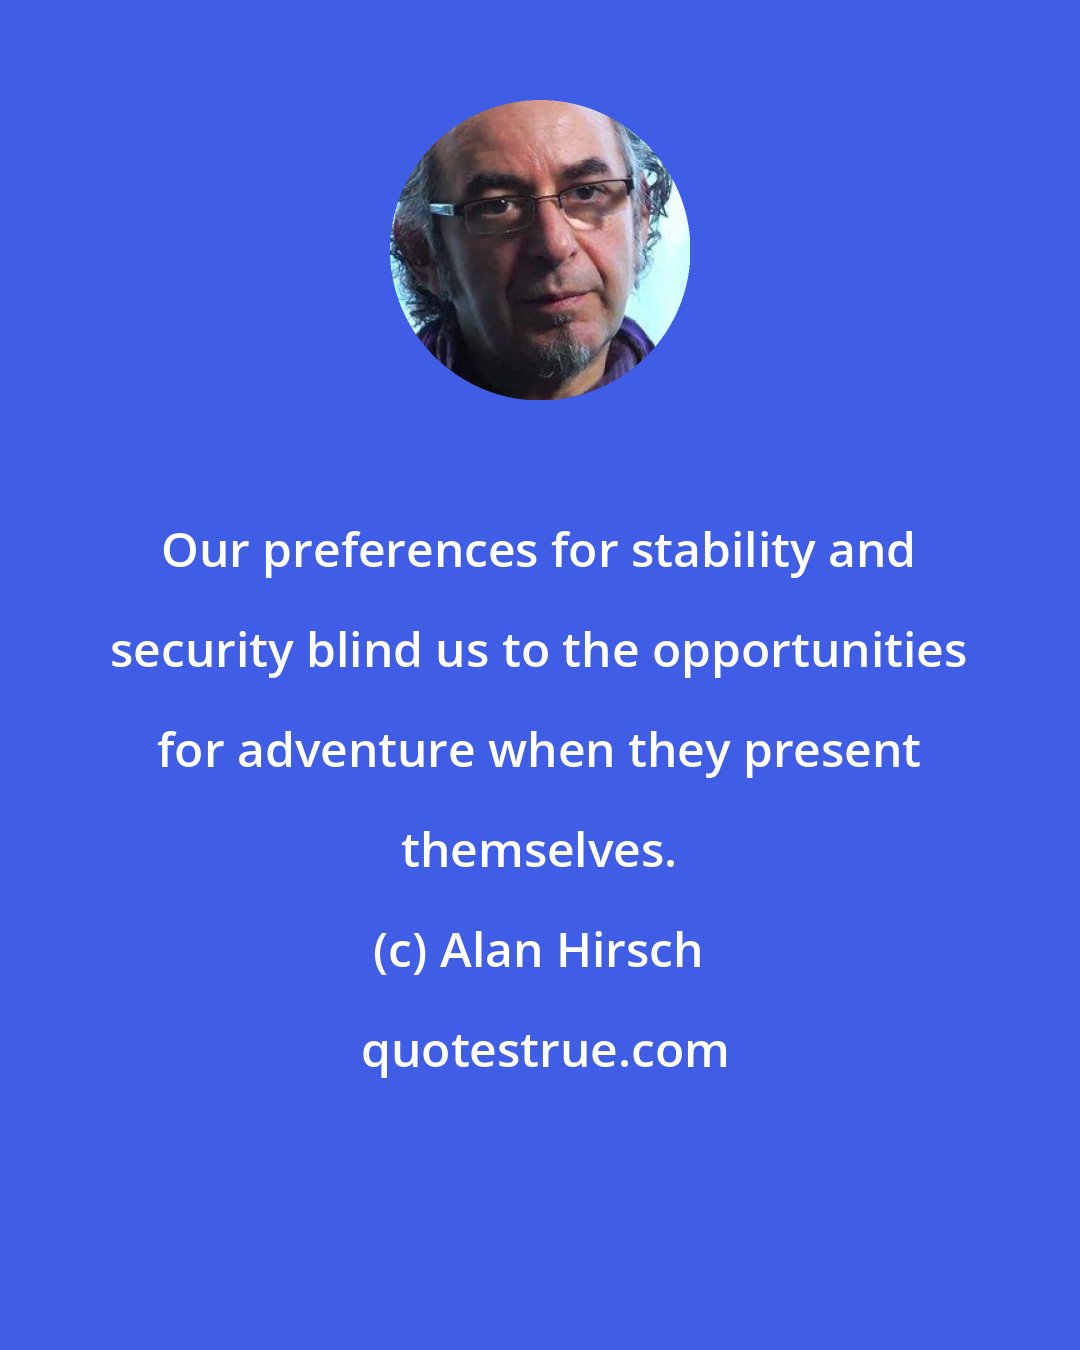 Alan Hirsch: Our preferences for stability and security blind us to the opportunities for adventure when they present themselves.